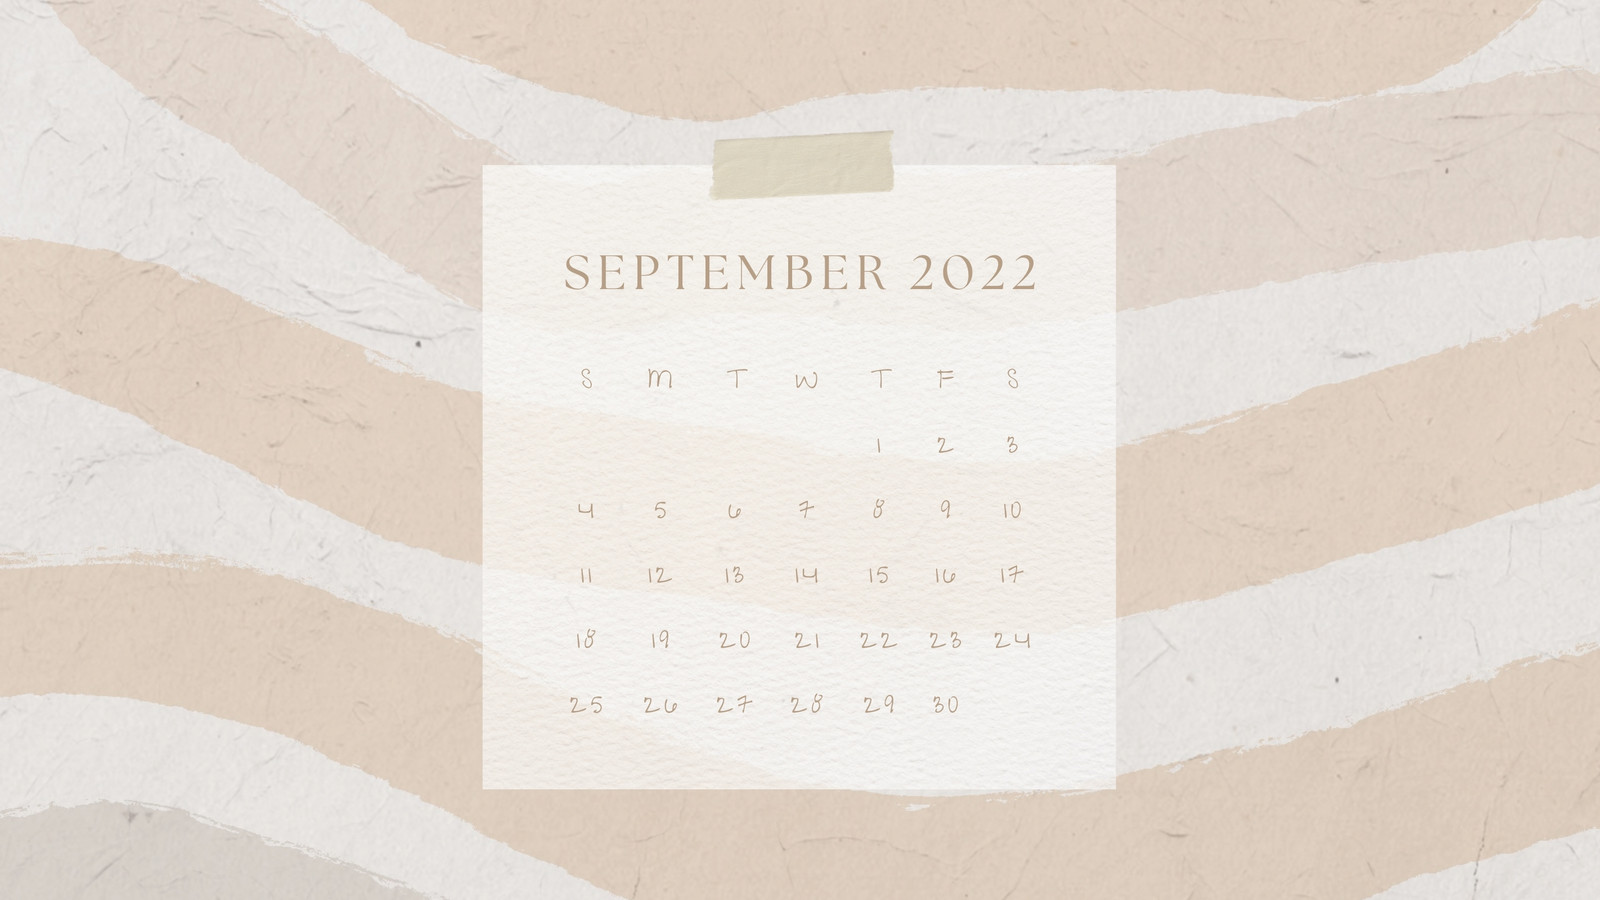 September Calendar PNG Picture Download 2022 Aesthetic September Calendar  September Calendar Calendar All 2022 PNG Image For Free Download